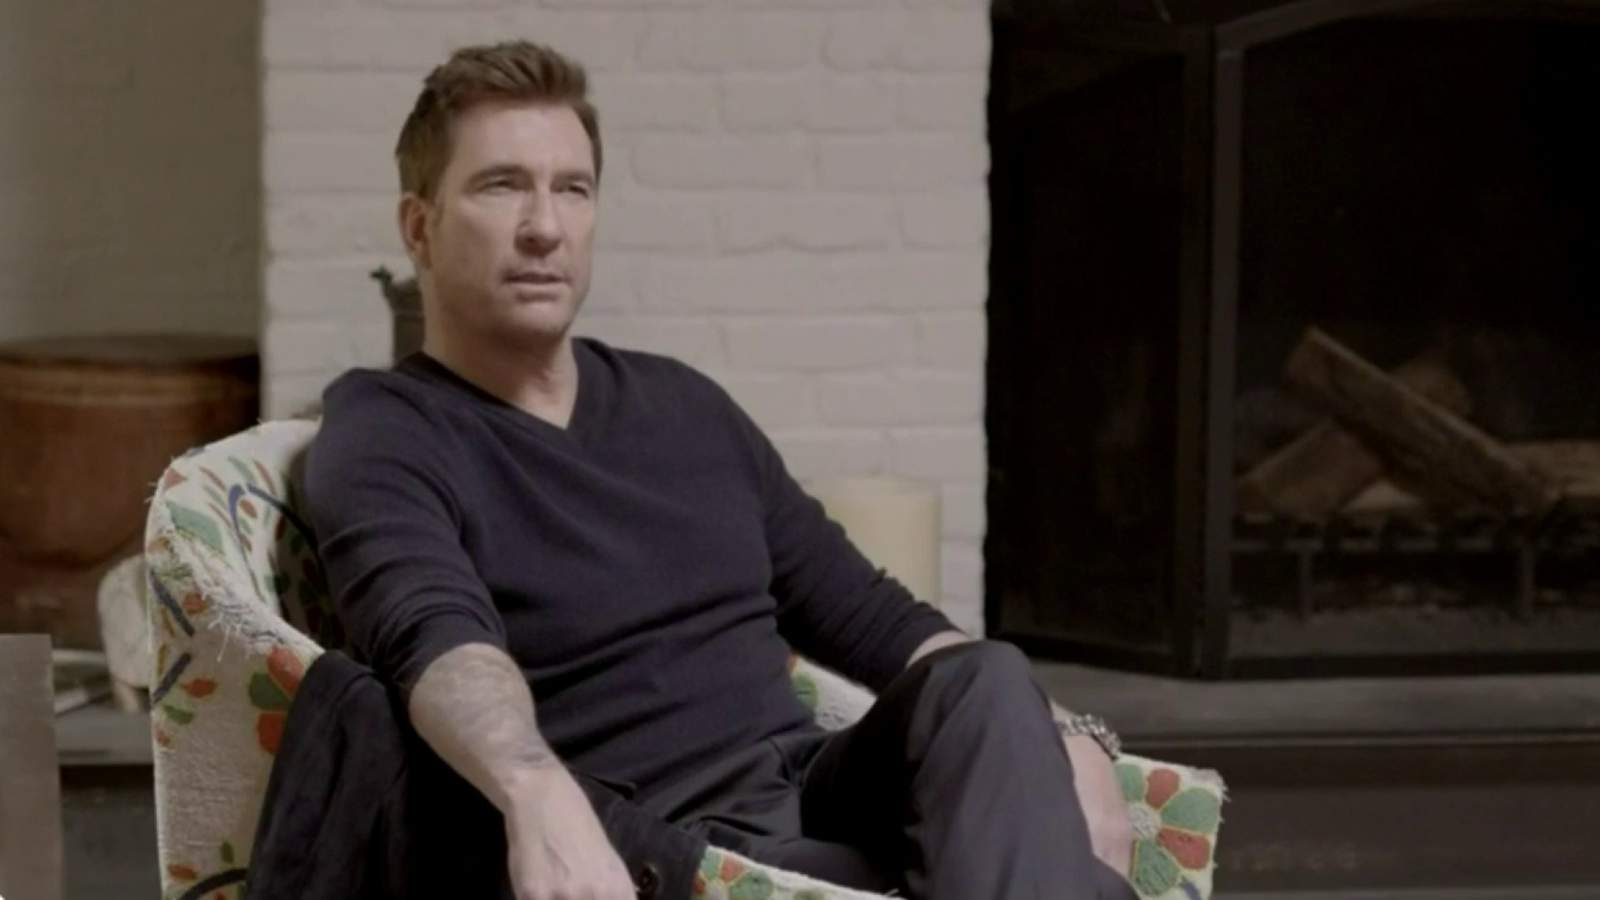 Dylan McDermott talks about starring in the new Law & Order: Organized Crime